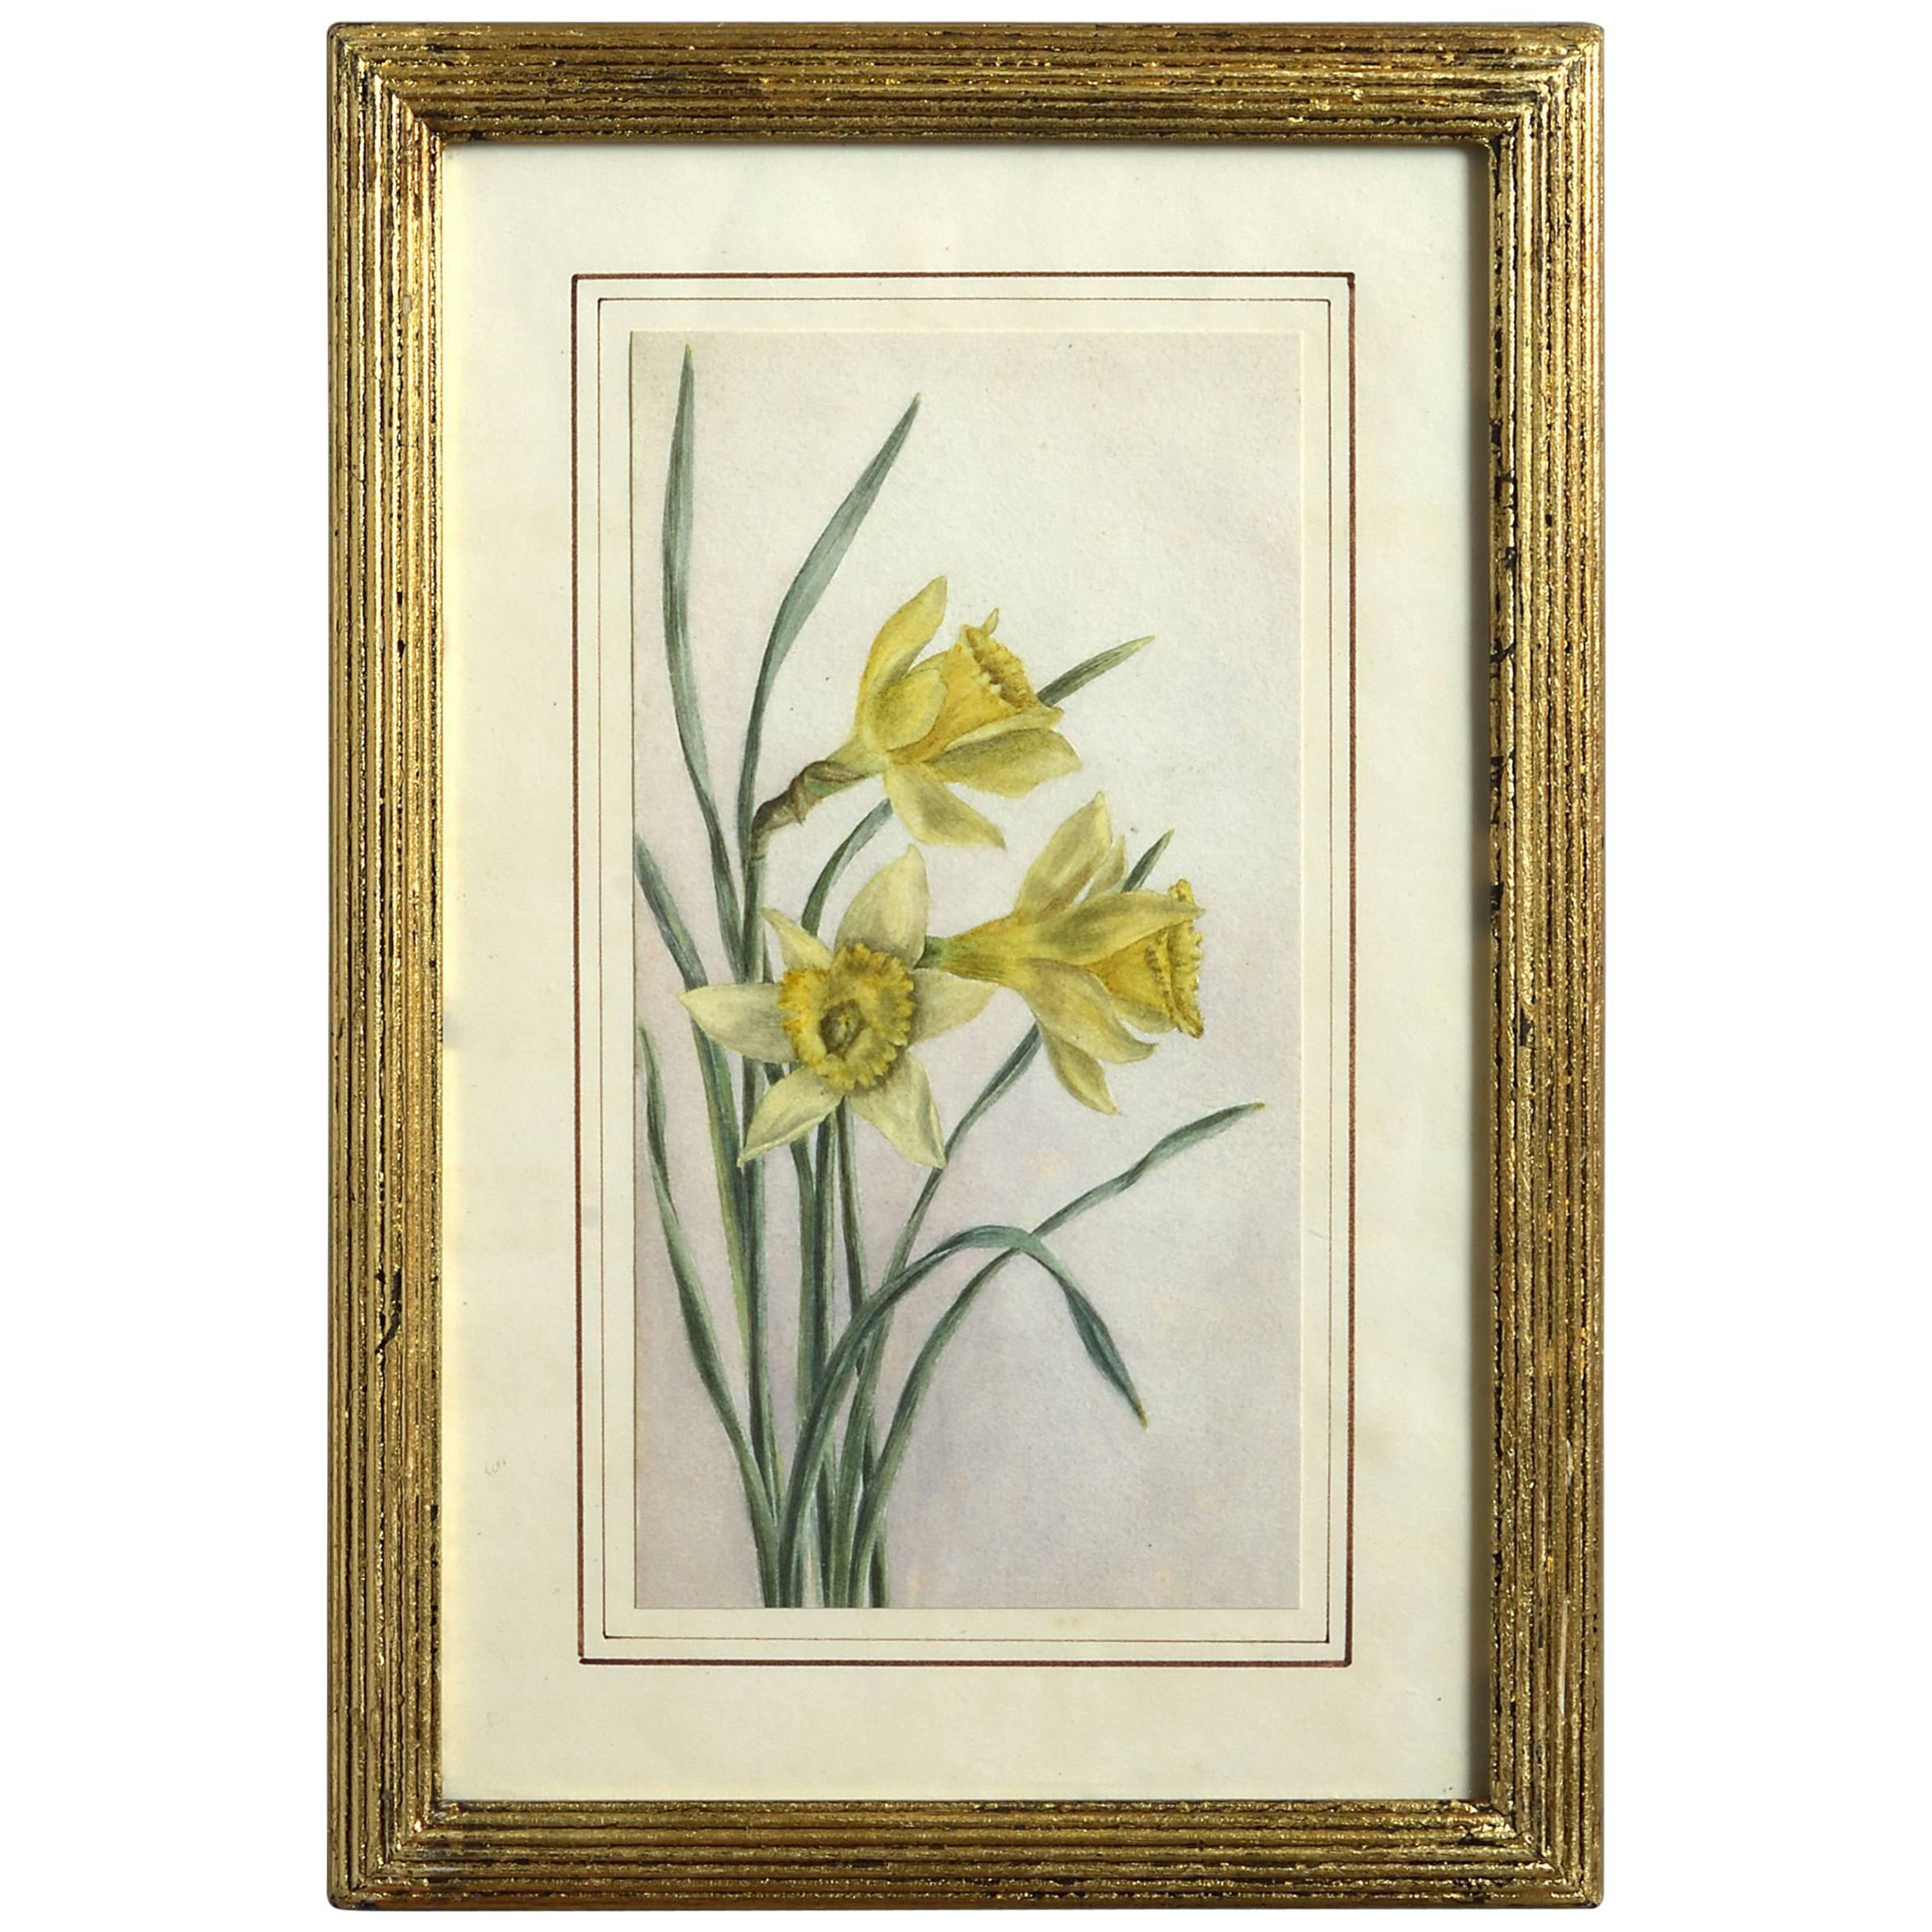 Late 19th Century 19th Century Watercolor Study of Dafffodils